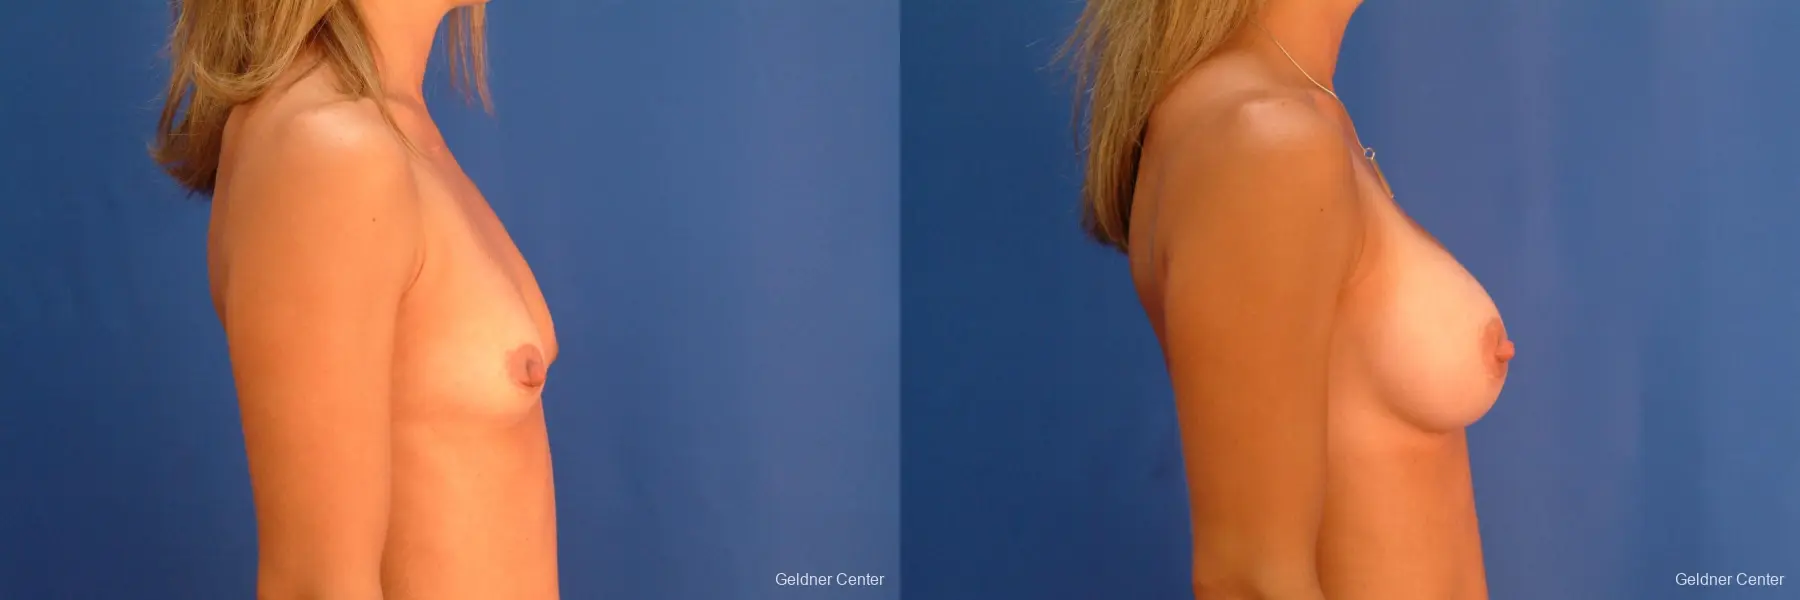 Breast Augmentation Hinsdale, Chicago 2510 - Before and After 2